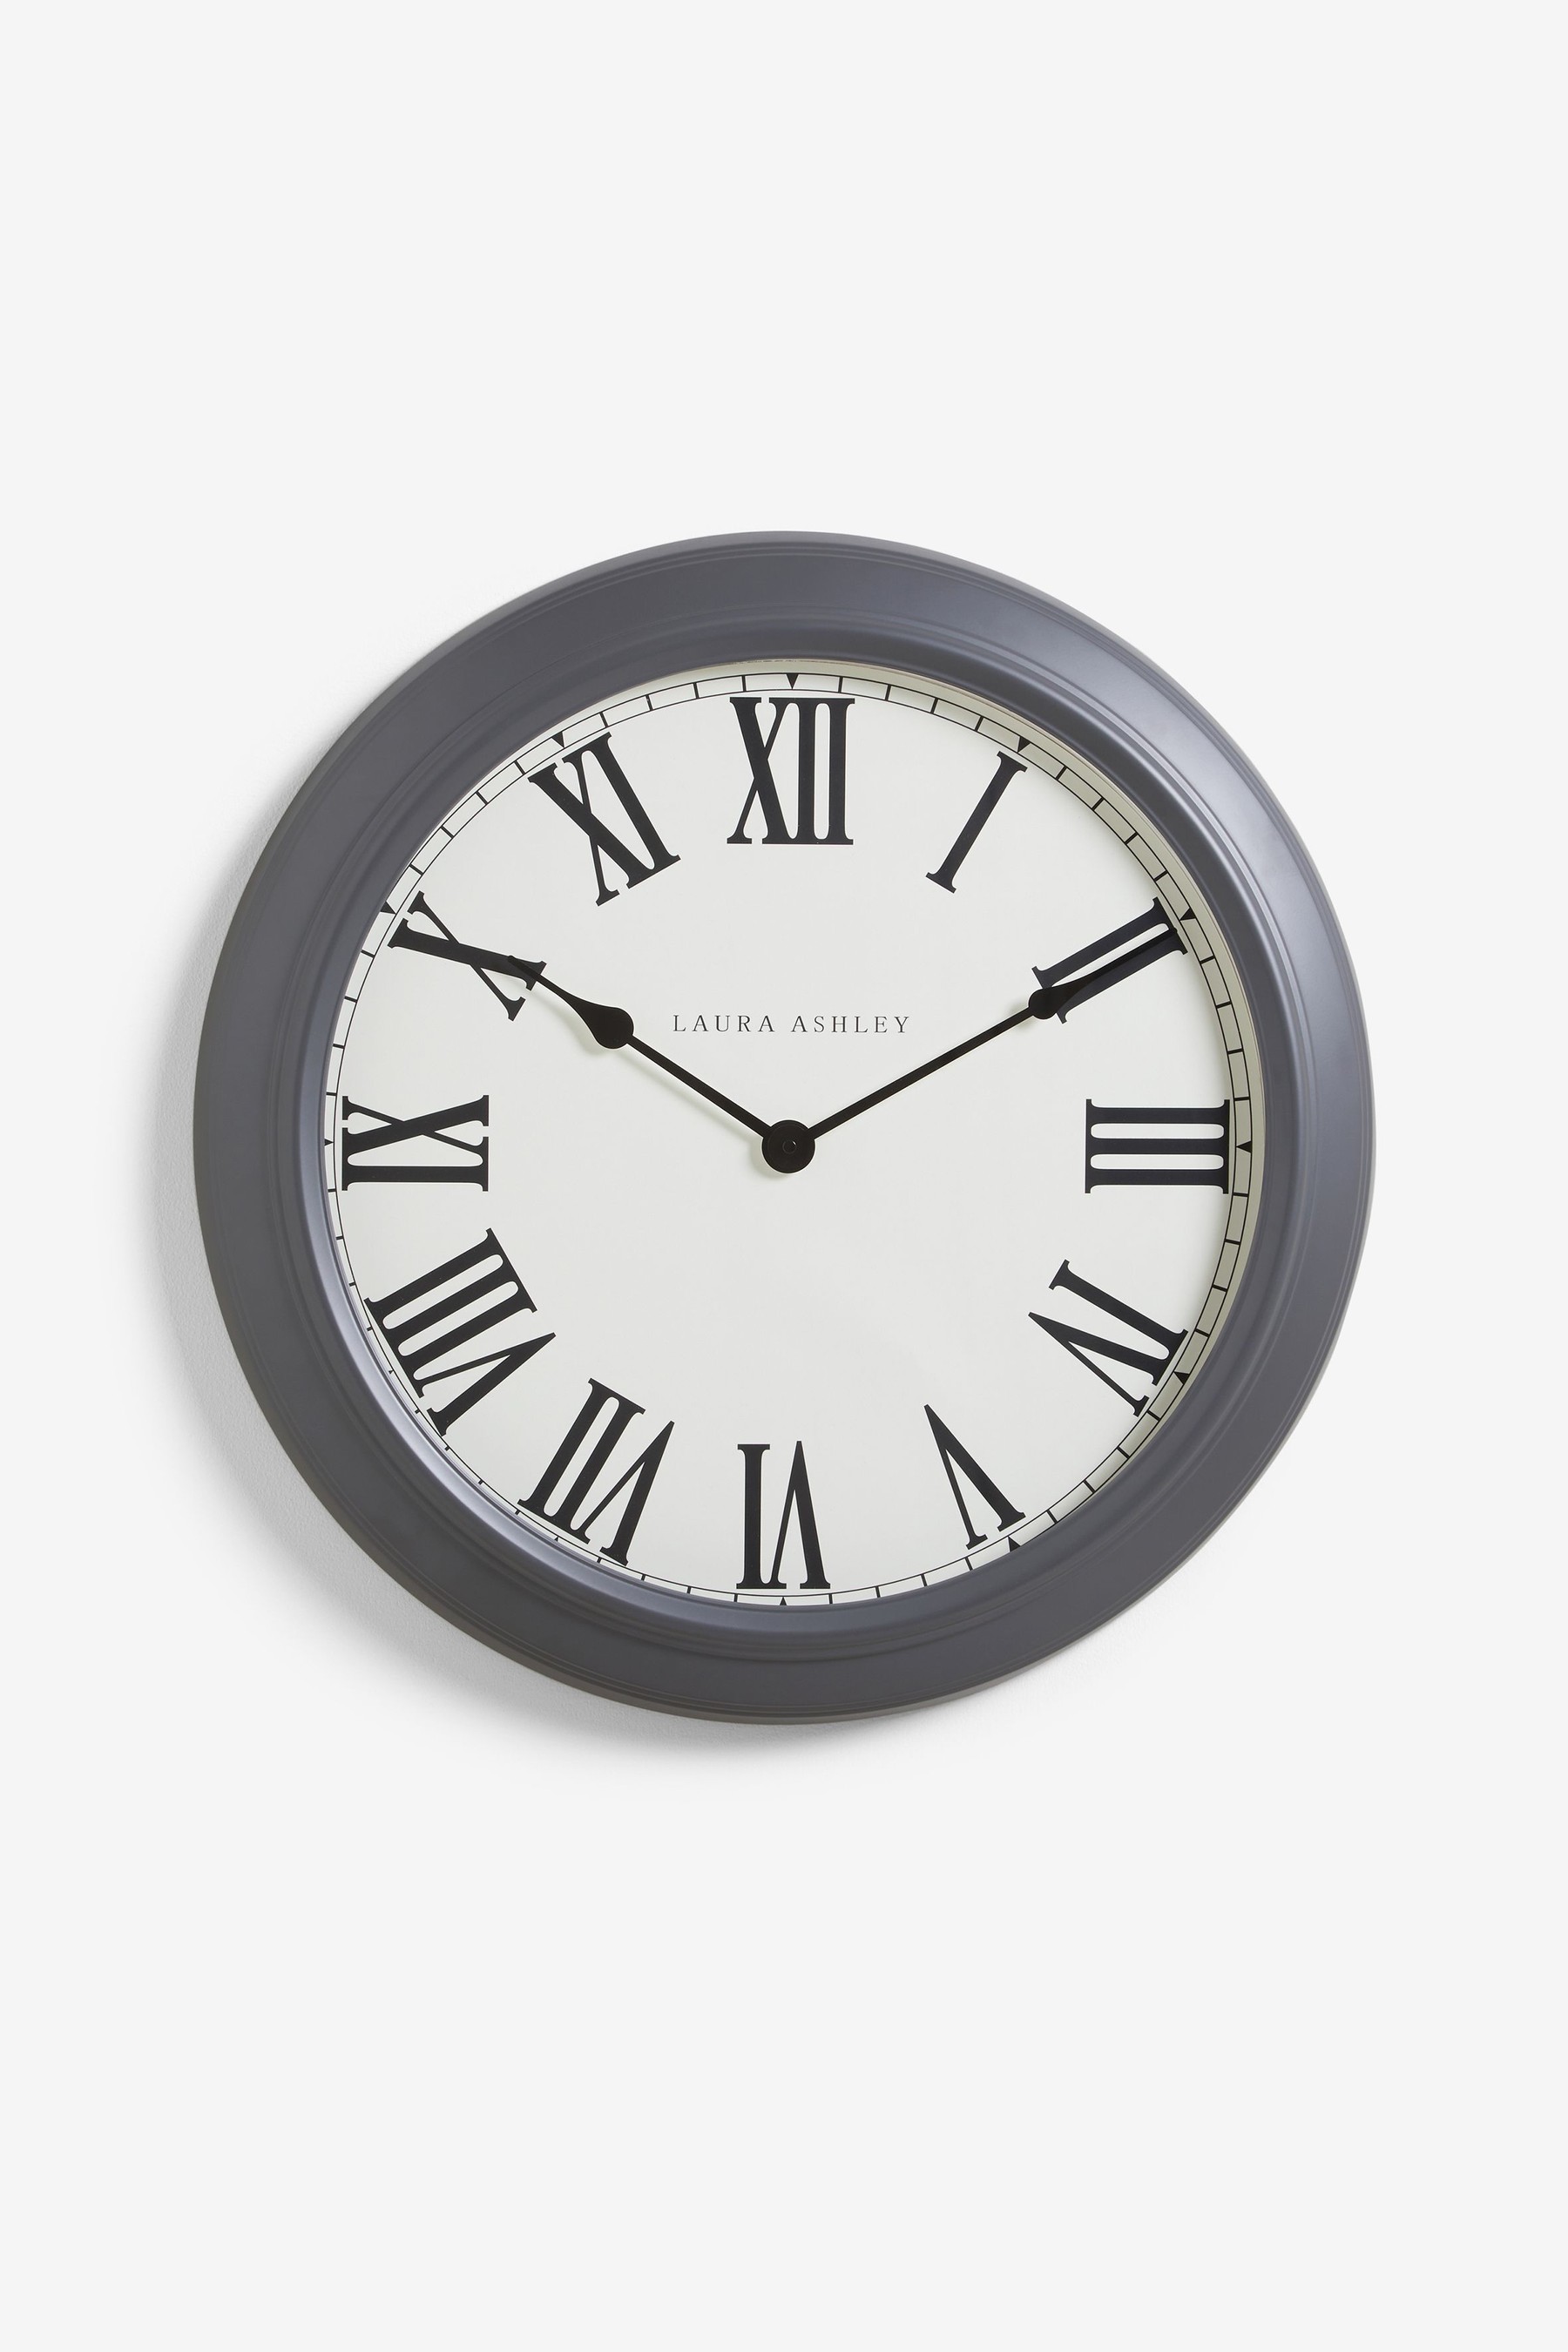 Buy Laura Ashley Oversized Gallery Wall Clock from the Next UK online shop